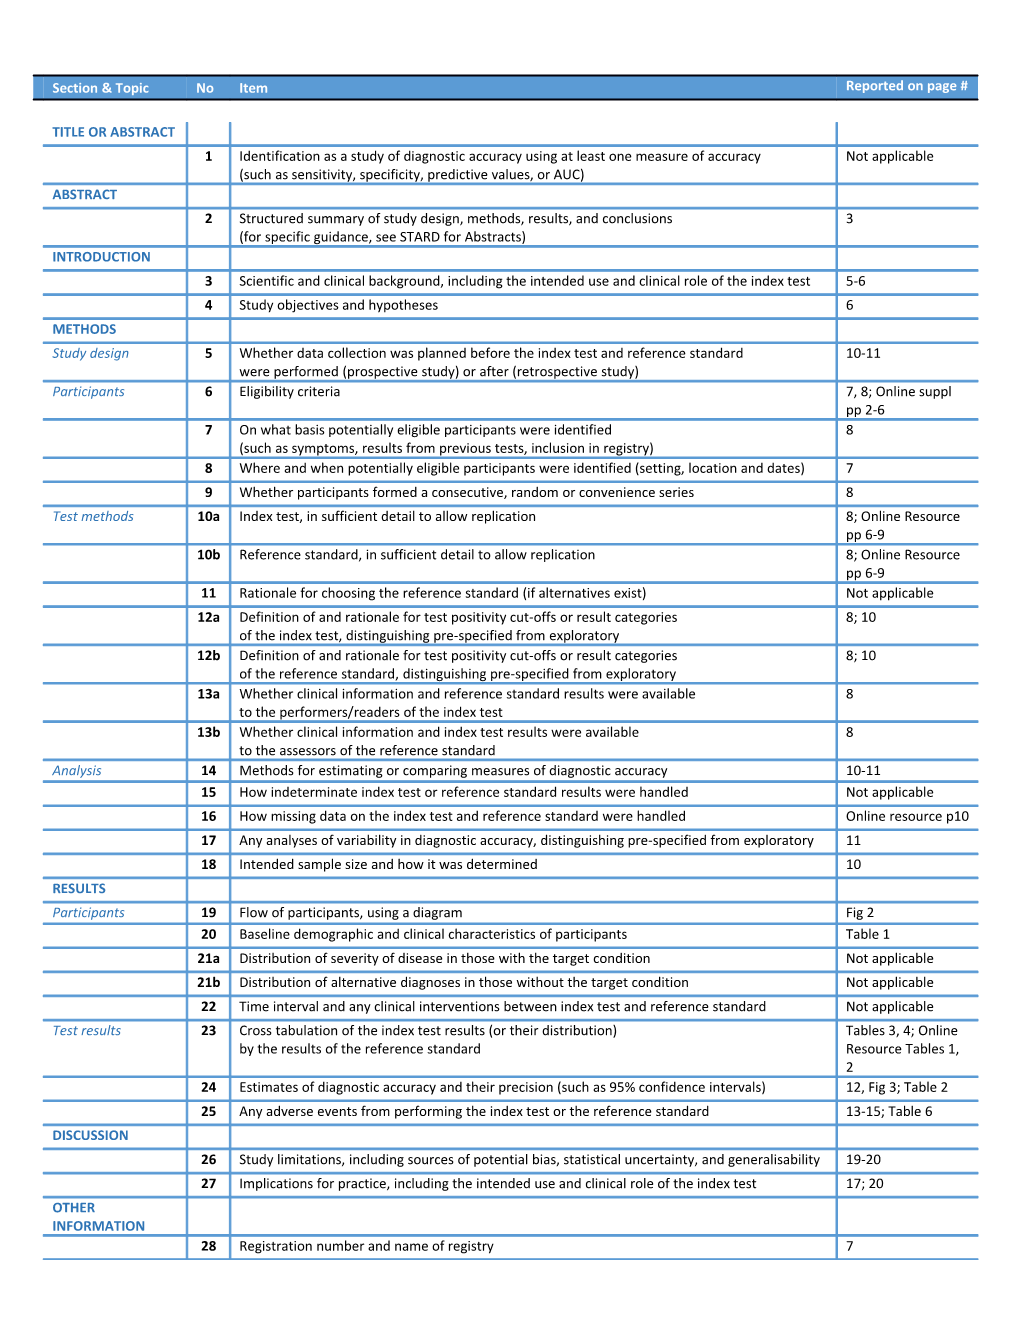 STARD Stands for Standards for Reporting Diagnostic Accuracy Studies . This List of Items